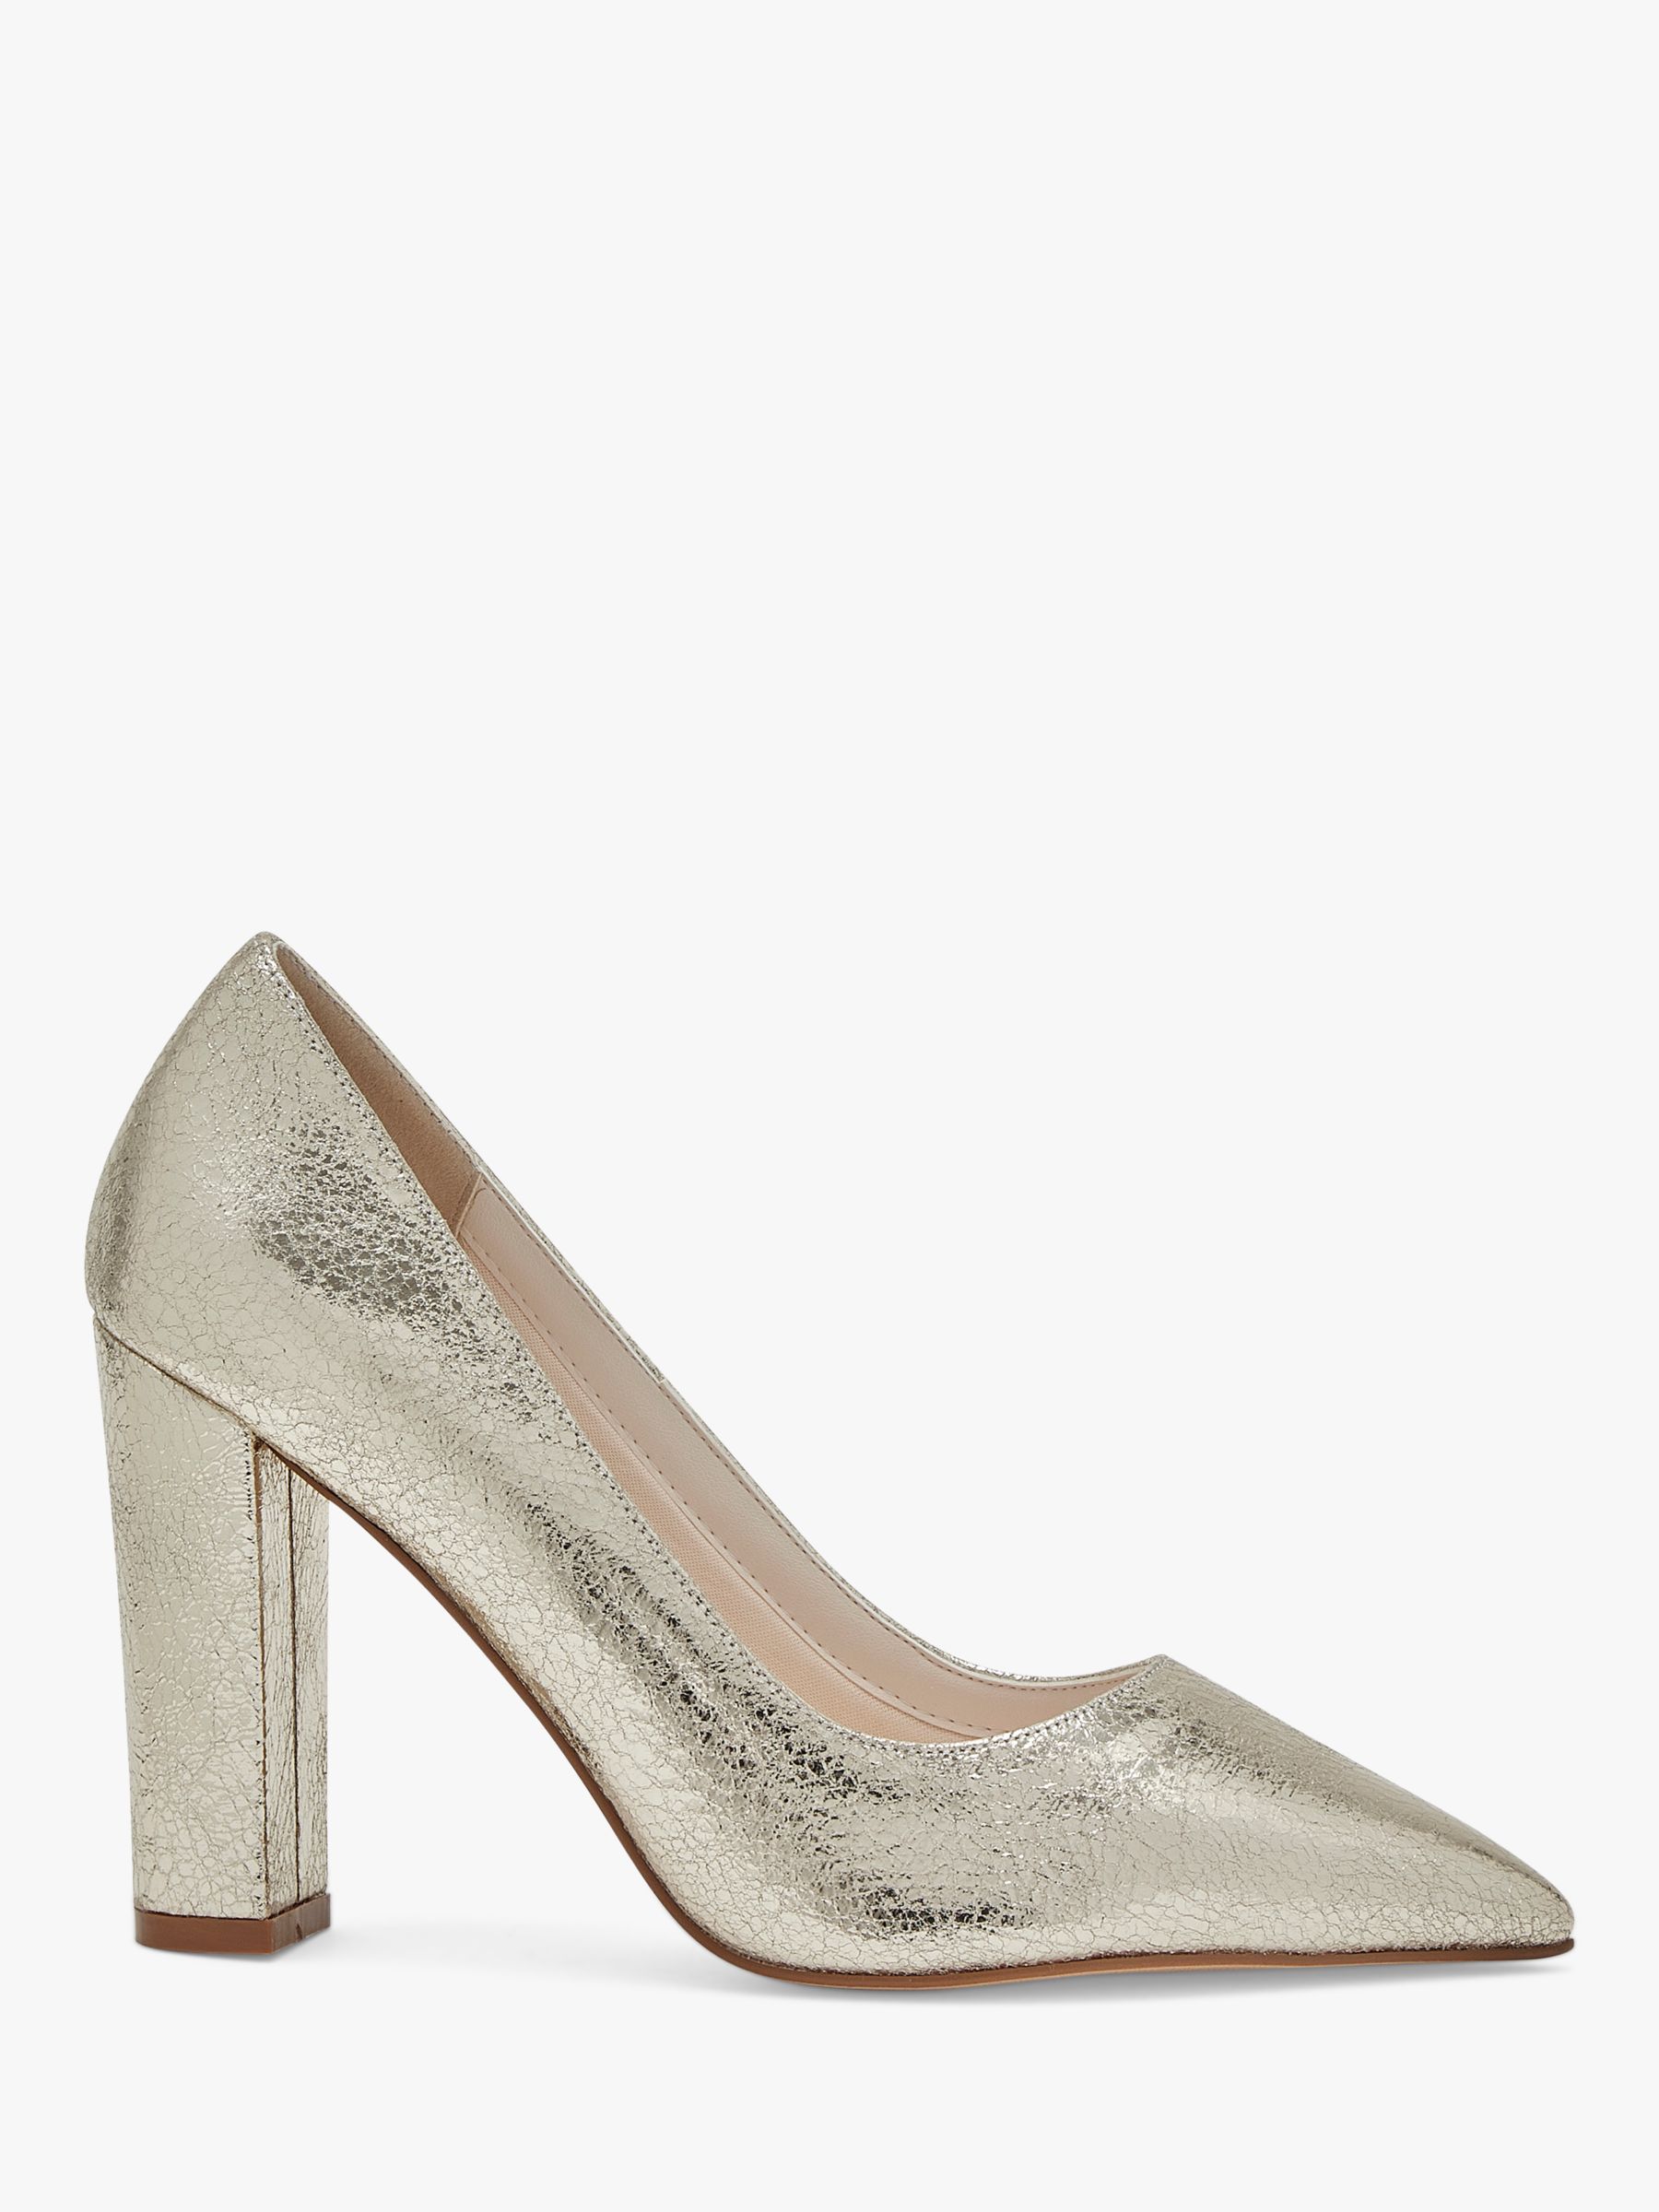 Rainbow Club Remi Block Heel Shoes, Crackled Gold, 3